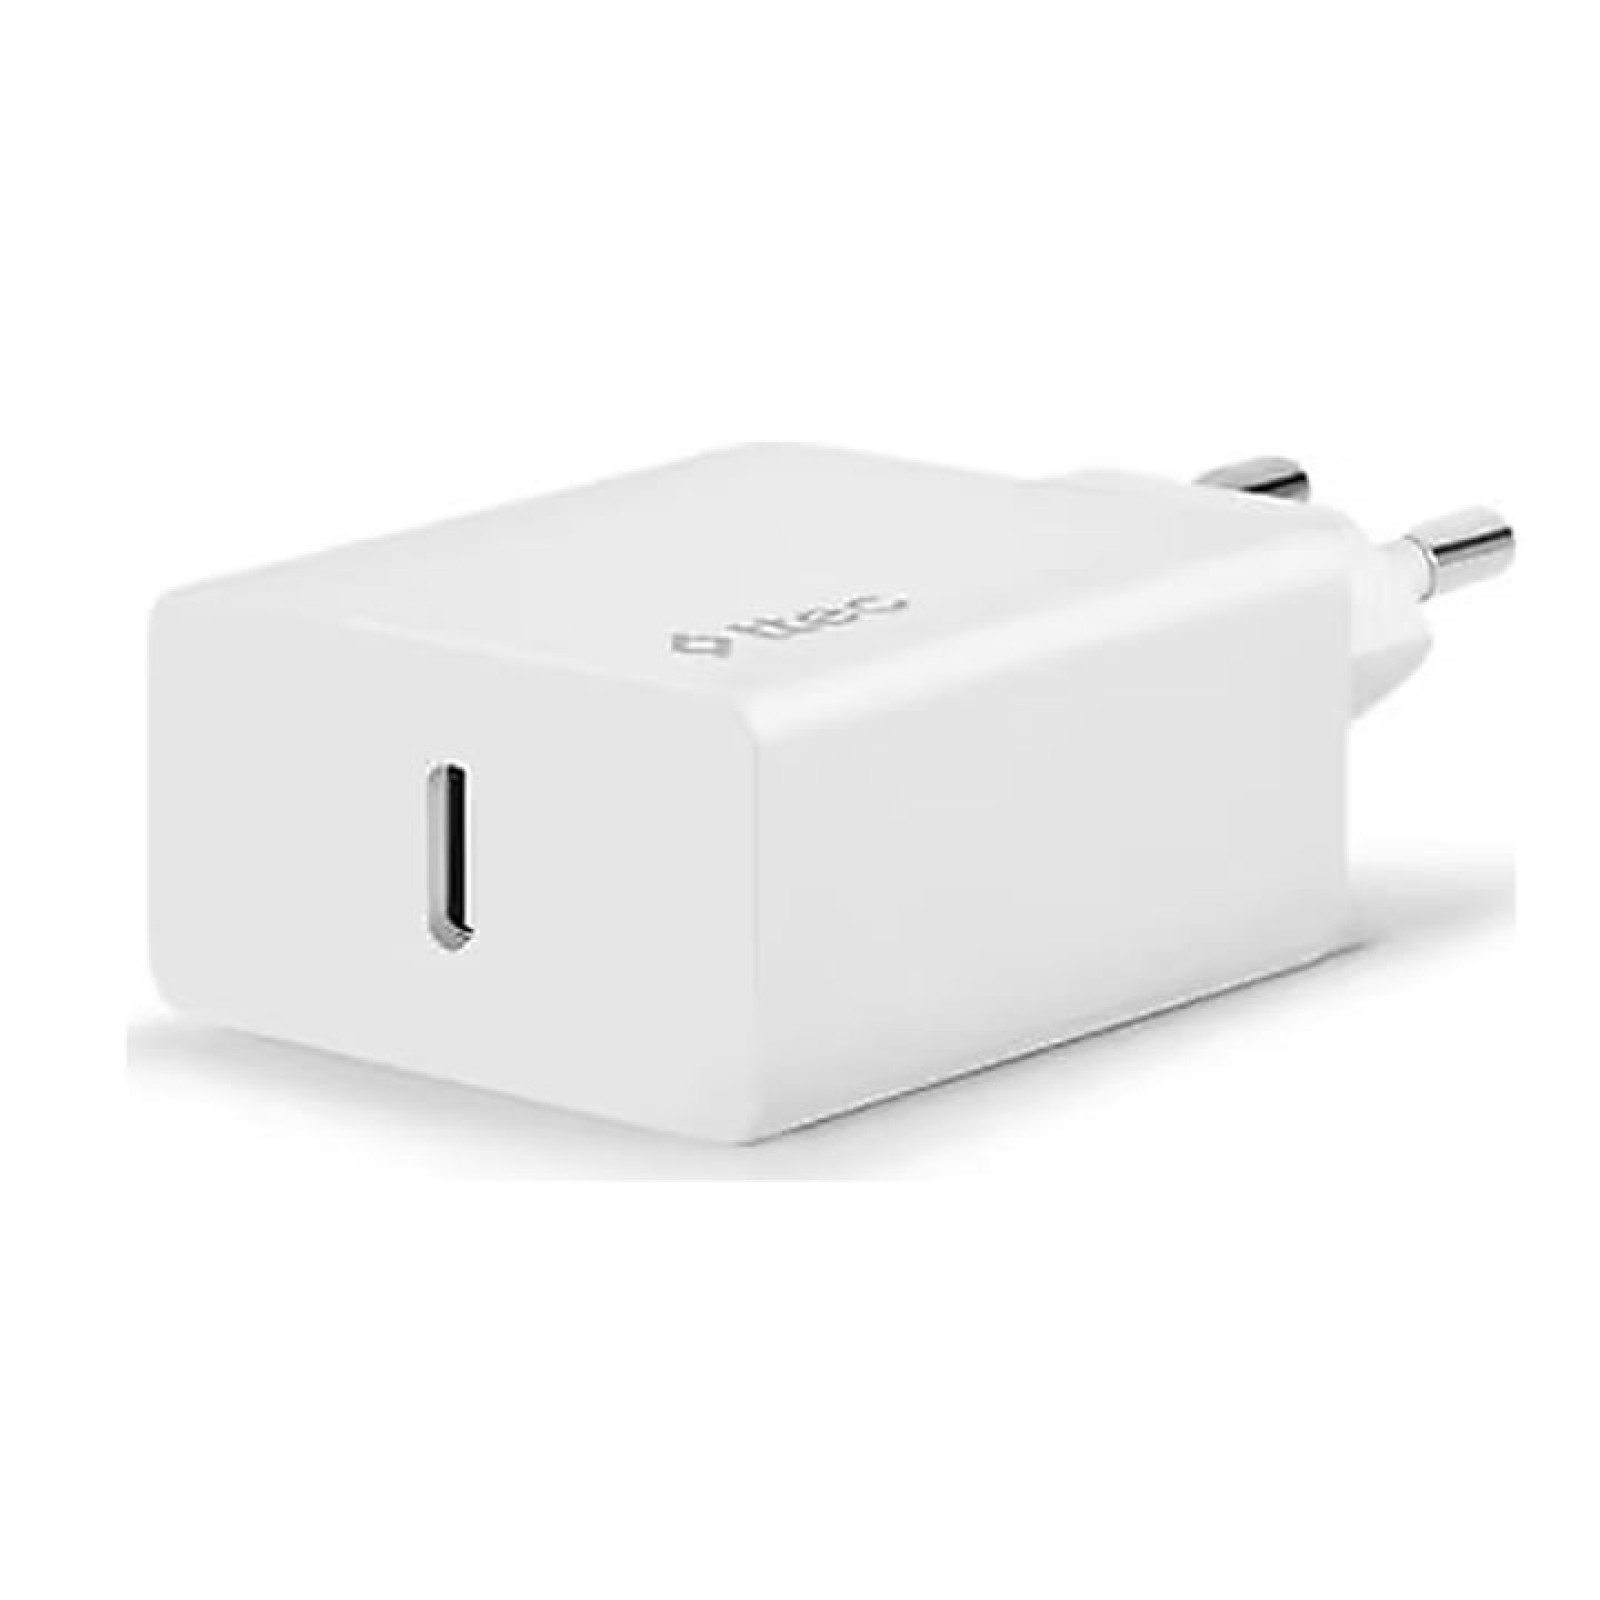 Зарядно устройство ttec, SmartCharger, PD, Travel Charger, 20W + 2DK40, Type-C to Lightning Cable, Бяло